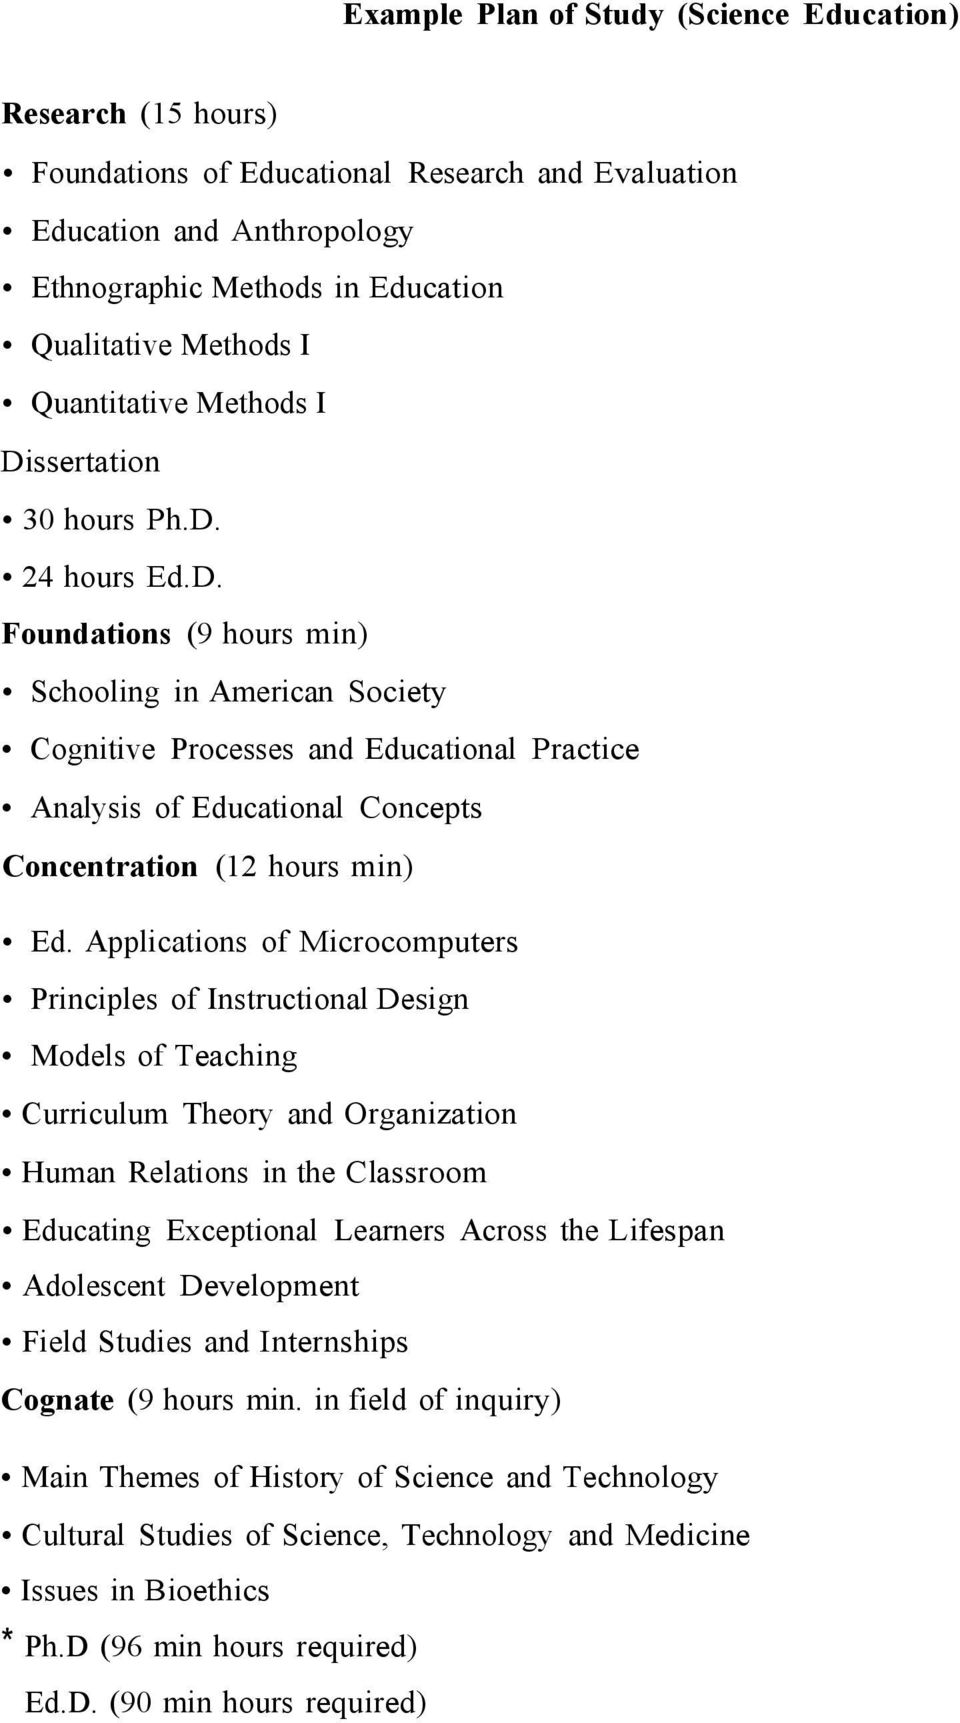 Applications of Microcomputers Principles of Instructional Design Models of Teaching Curriculum Theory and Organization Human Relations in the Classroom Educating Exceptional Learners Across the